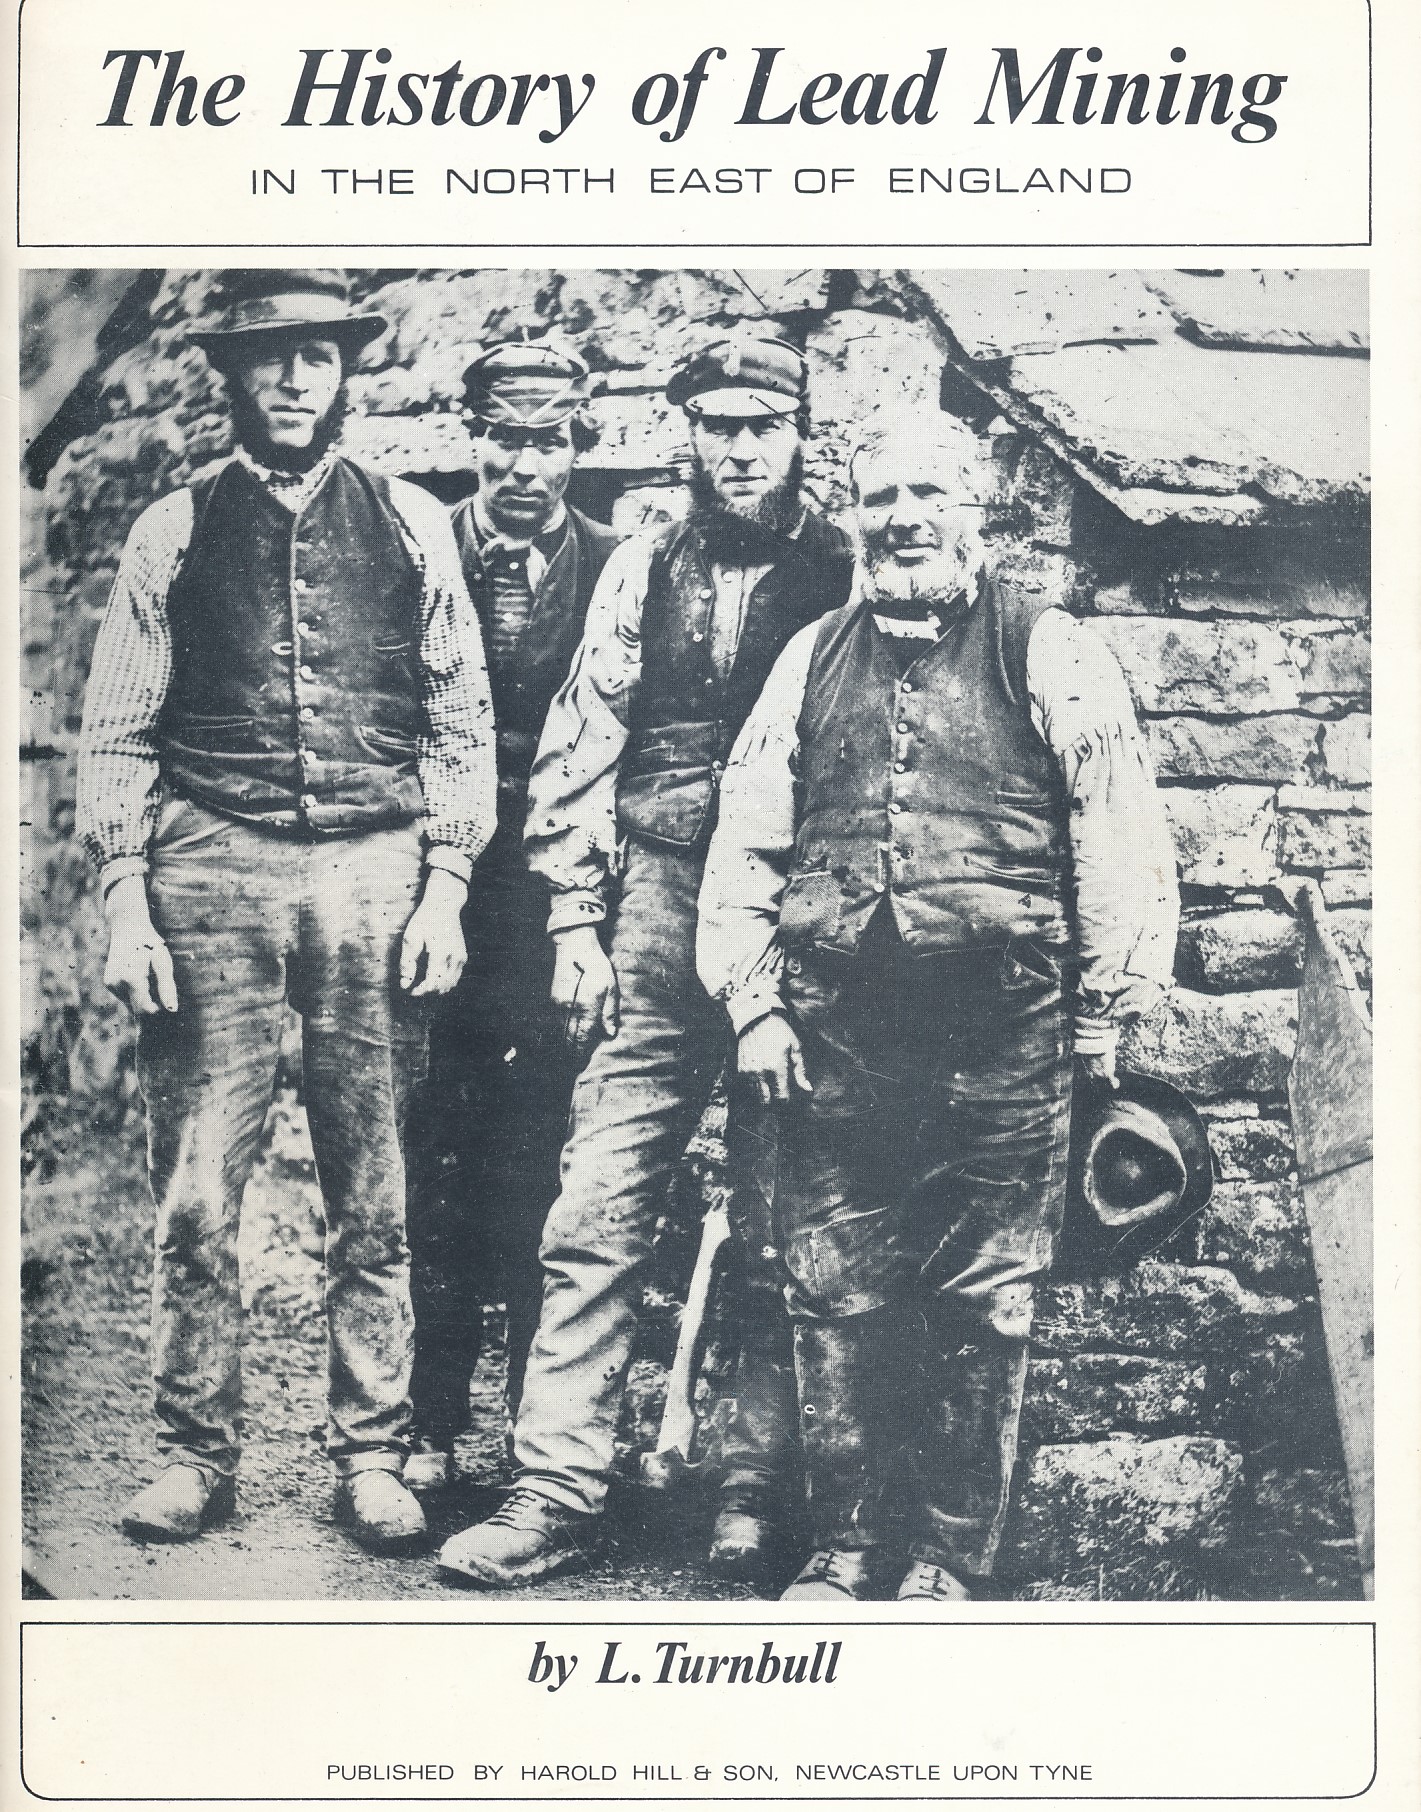 The History of Lead Mining in the North East of England